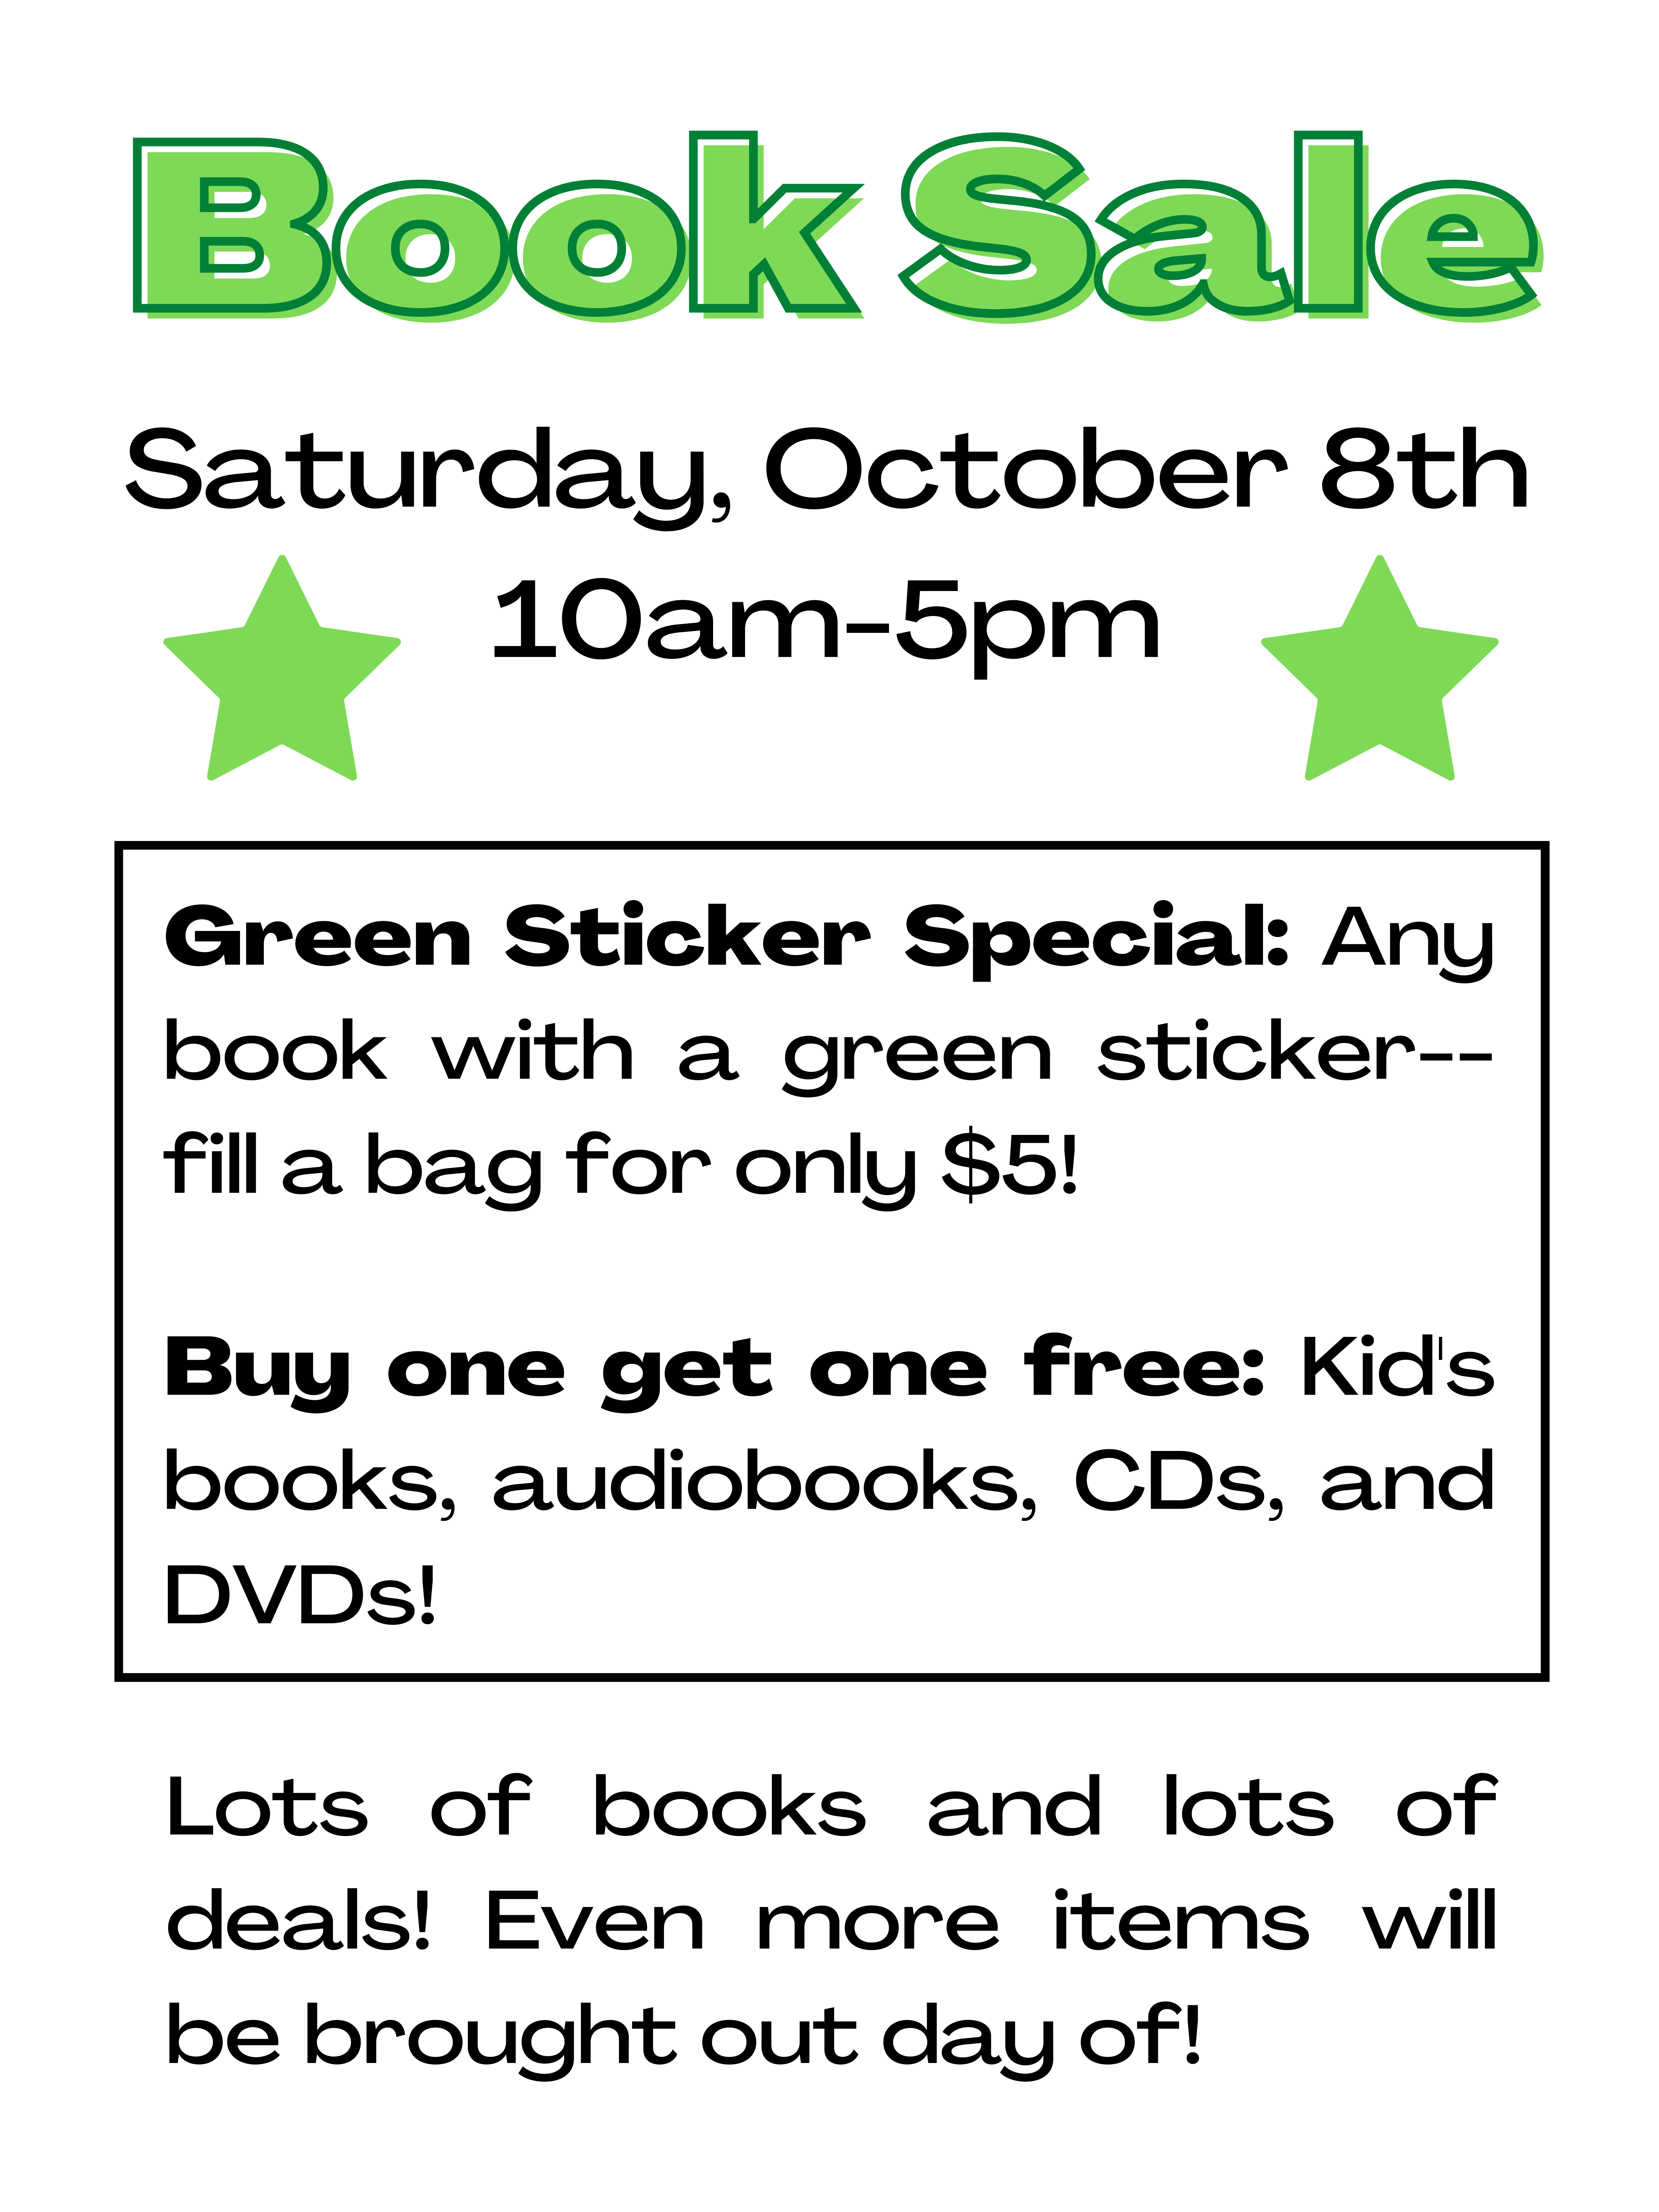 Book Sale: Saturday, October 8th 10am-5pm.  Green Sticker Special: Any book with a green sticker--fill a bag for only $5.  Buy one get one free: Kid's books, audiobooks, CDs, and DVDs.  Lots of books and lots of deals! Even more items will be brought out day of.